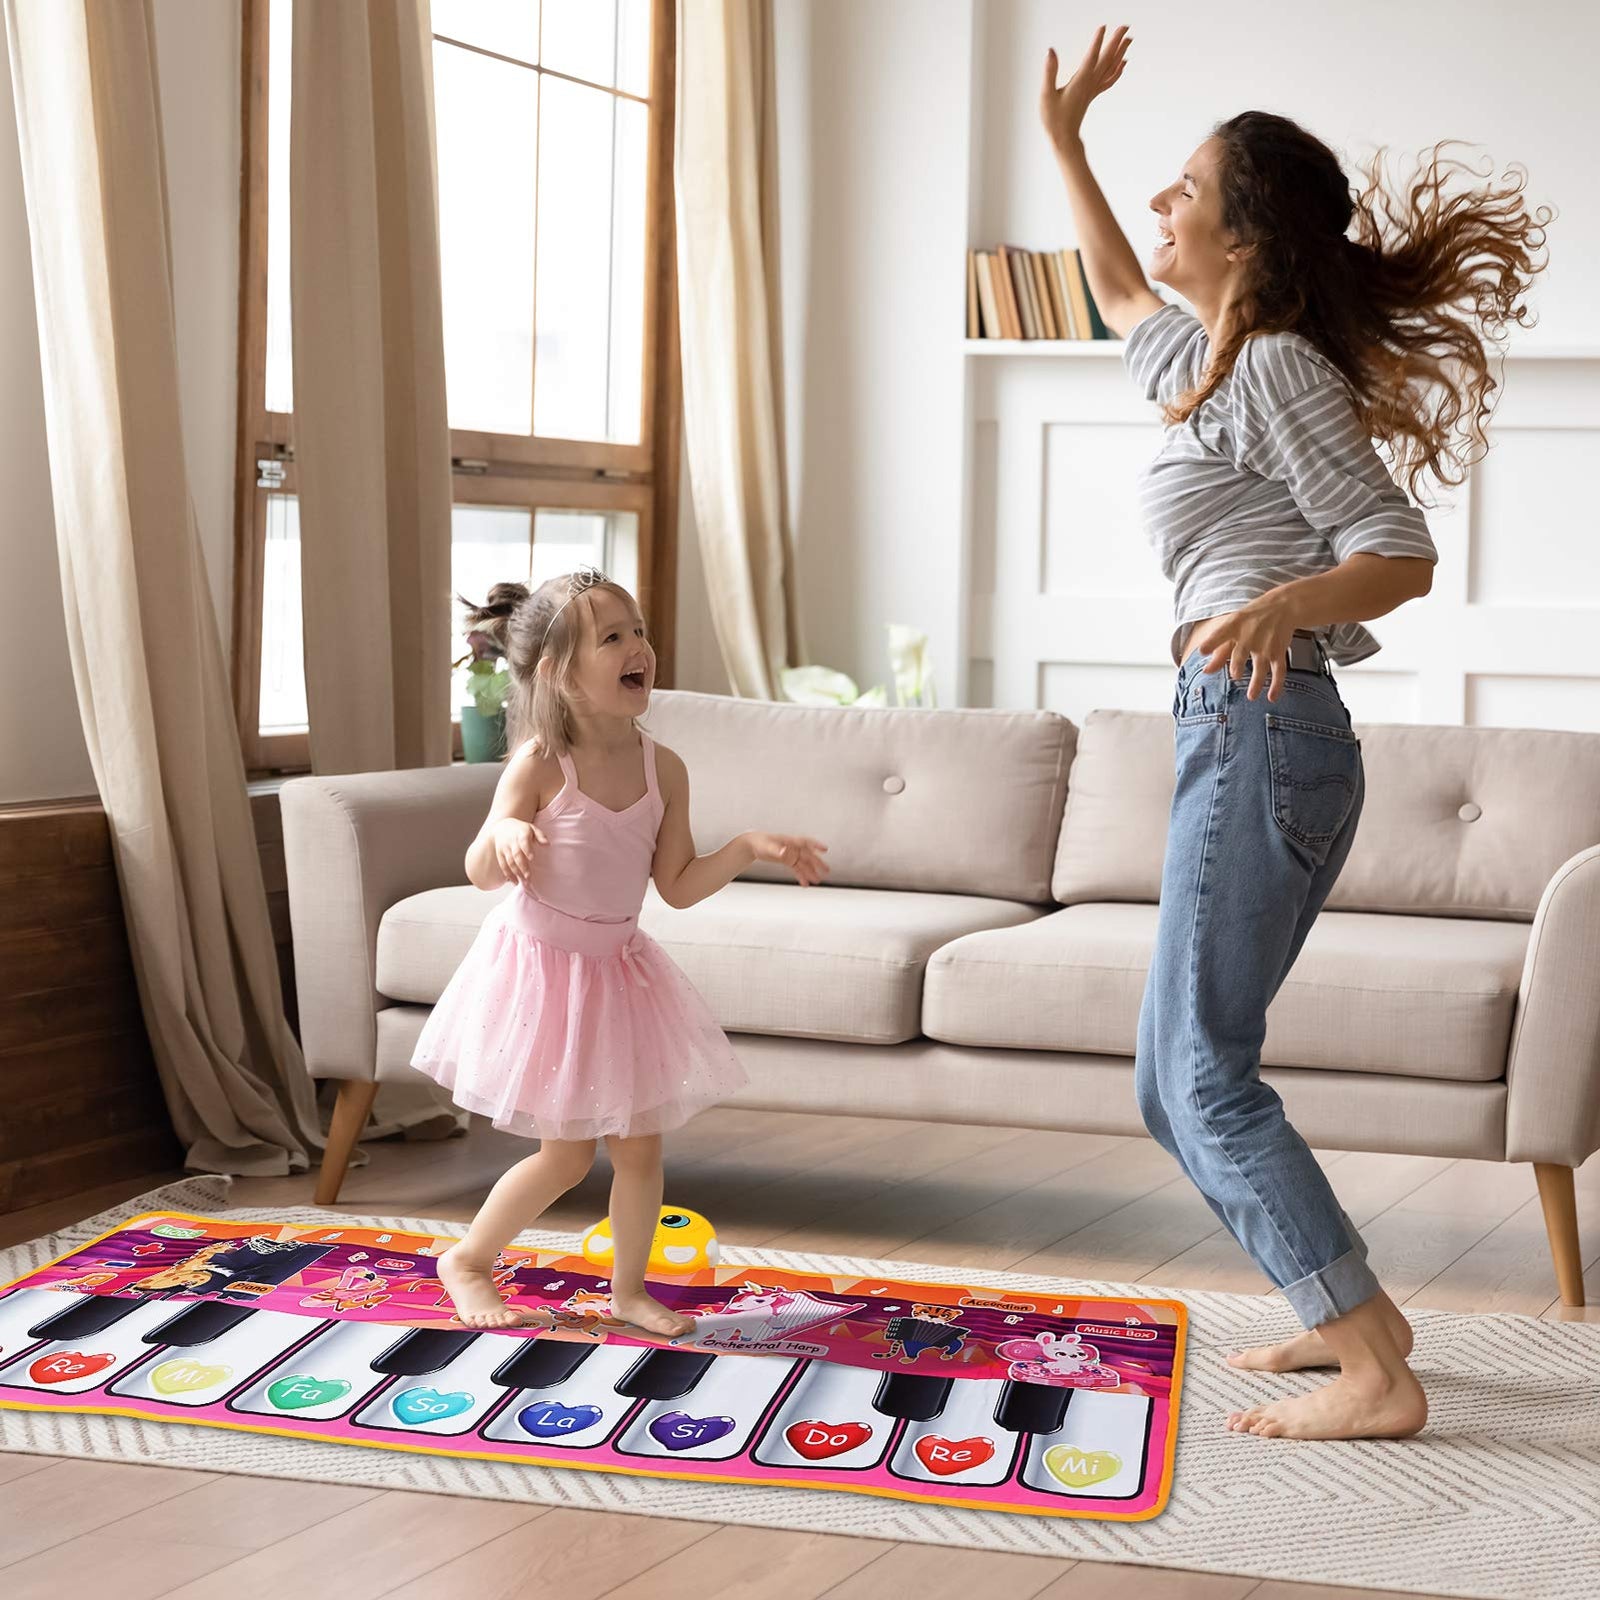 Kids Musical Piano Mats,47.24x15.75 inch Soft Baby Early Education Portable Dance Music Piano Keyboard Carpet Musical Touch Play Game Toy Gifts for 1 2 3 4 5 Year Kids Toddlers Girls Boys